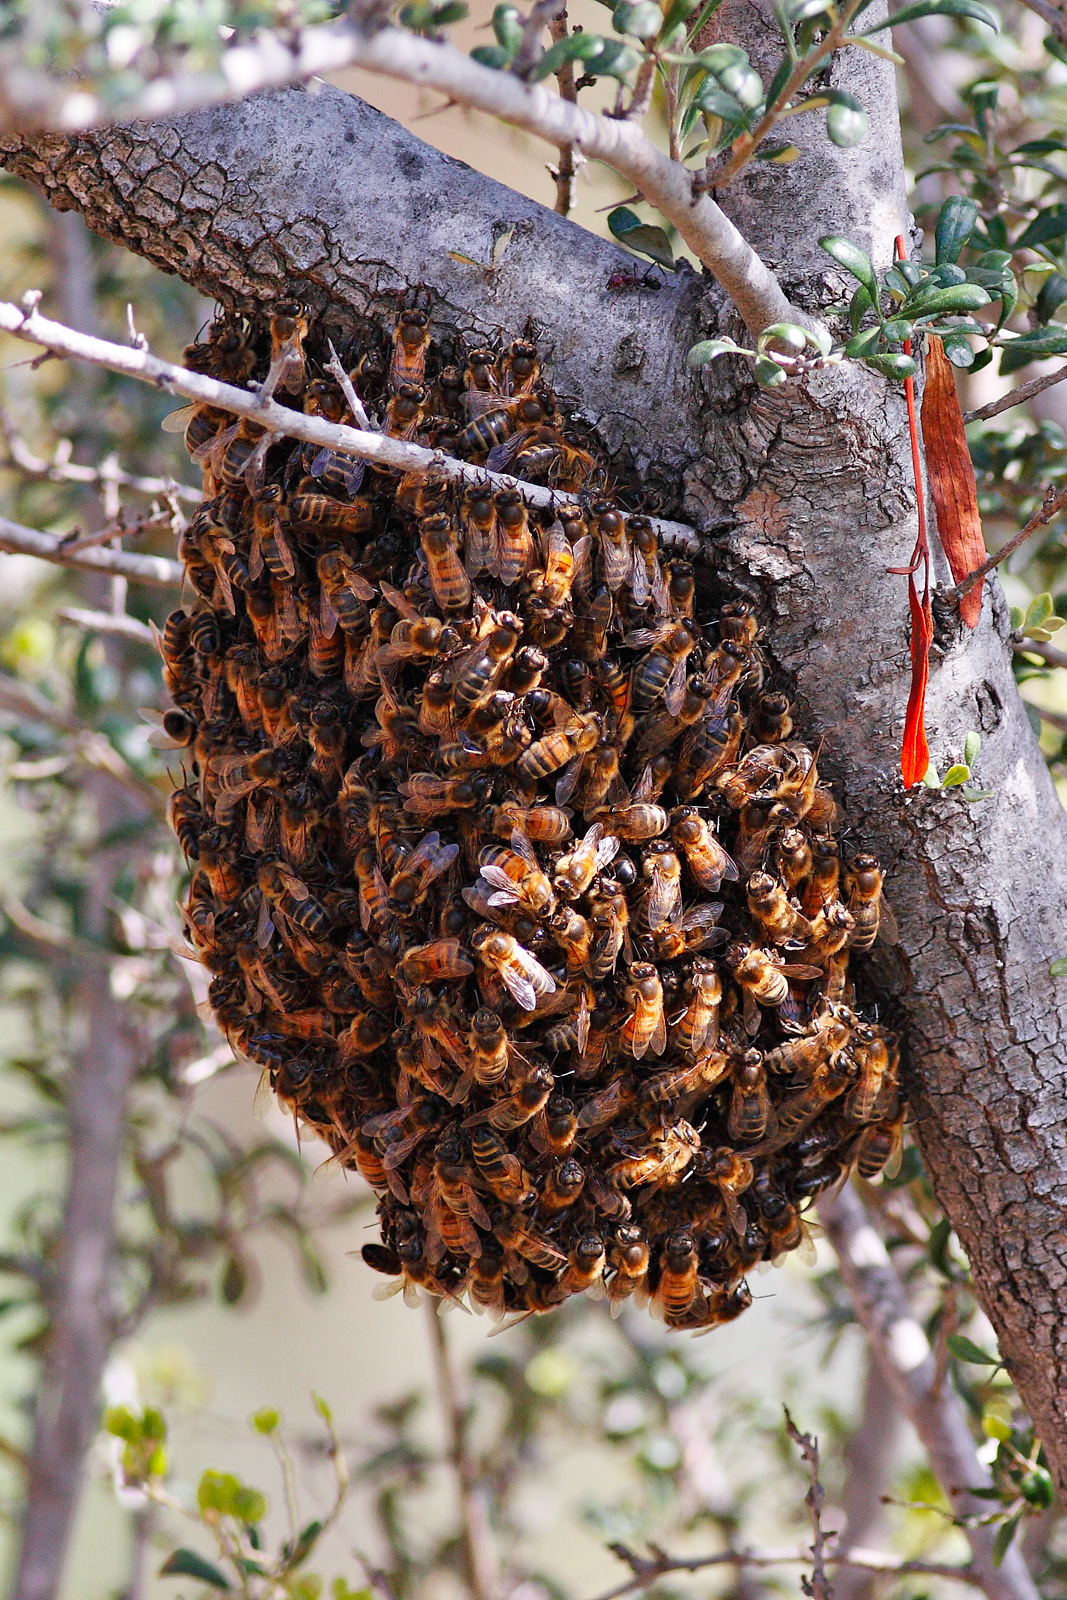 report-a-swarm-southern-oregon-beekeepers-association